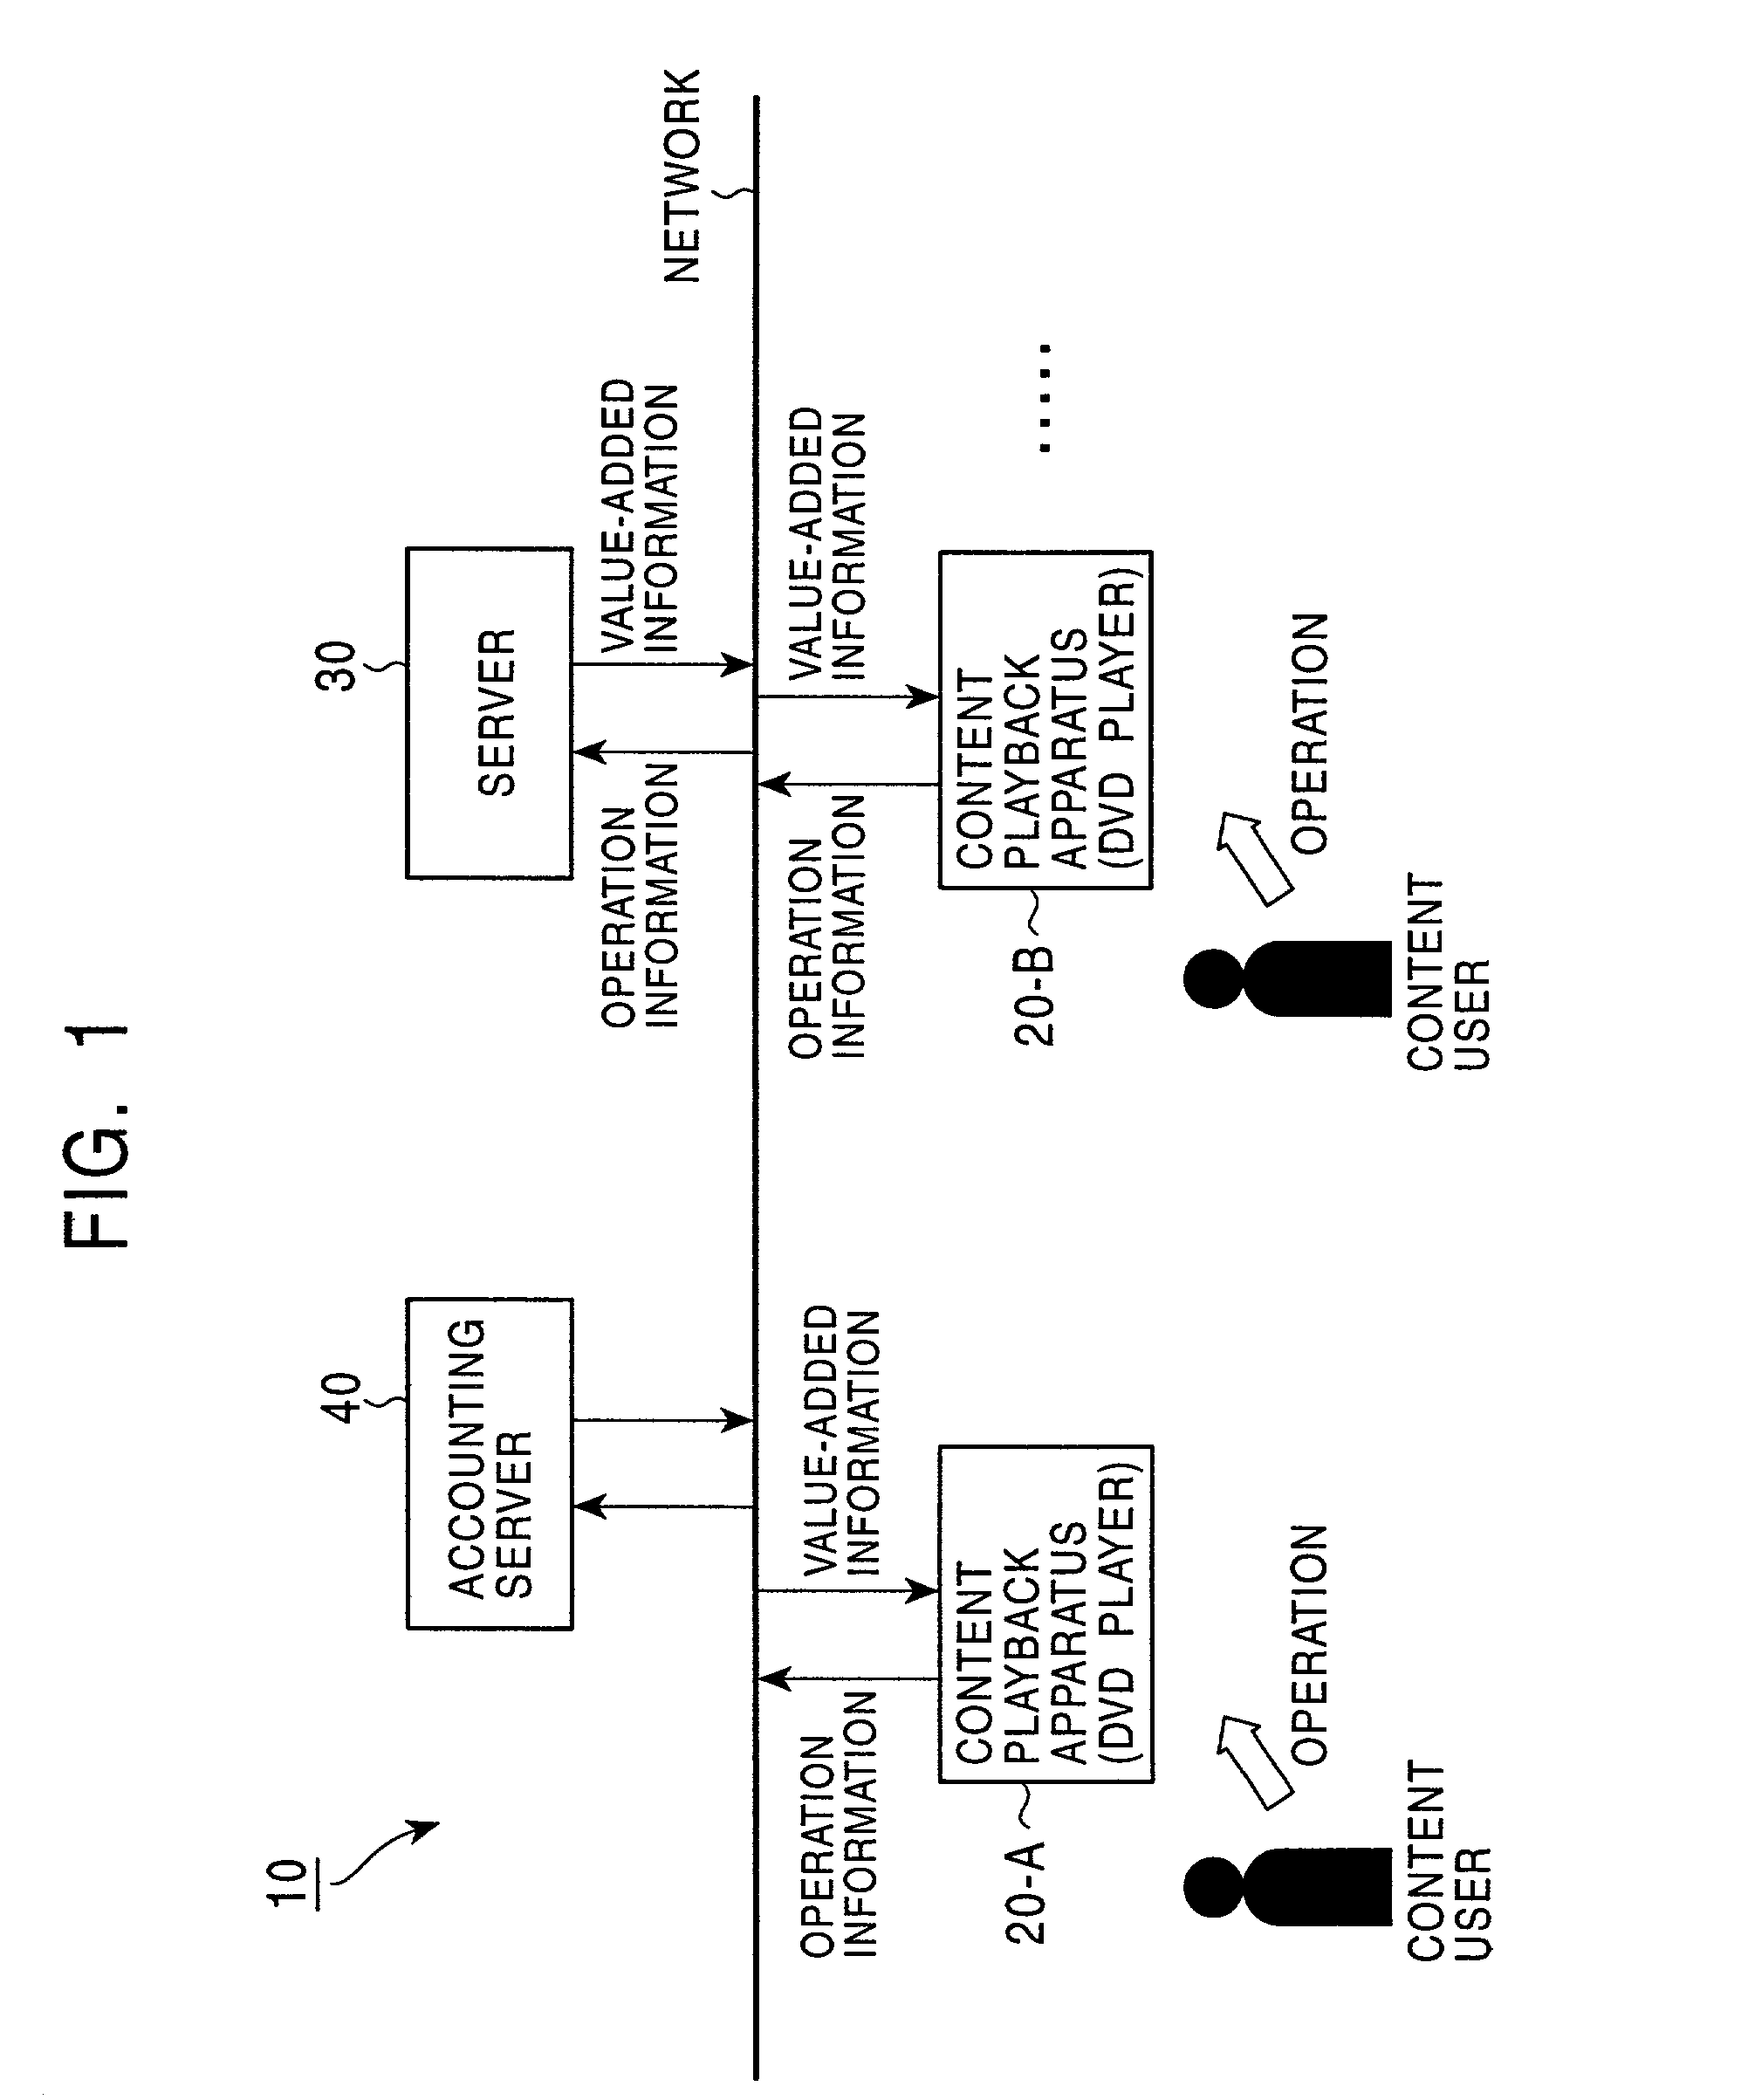 Content processing apparatus and content processing method for digest information based on input of a content user